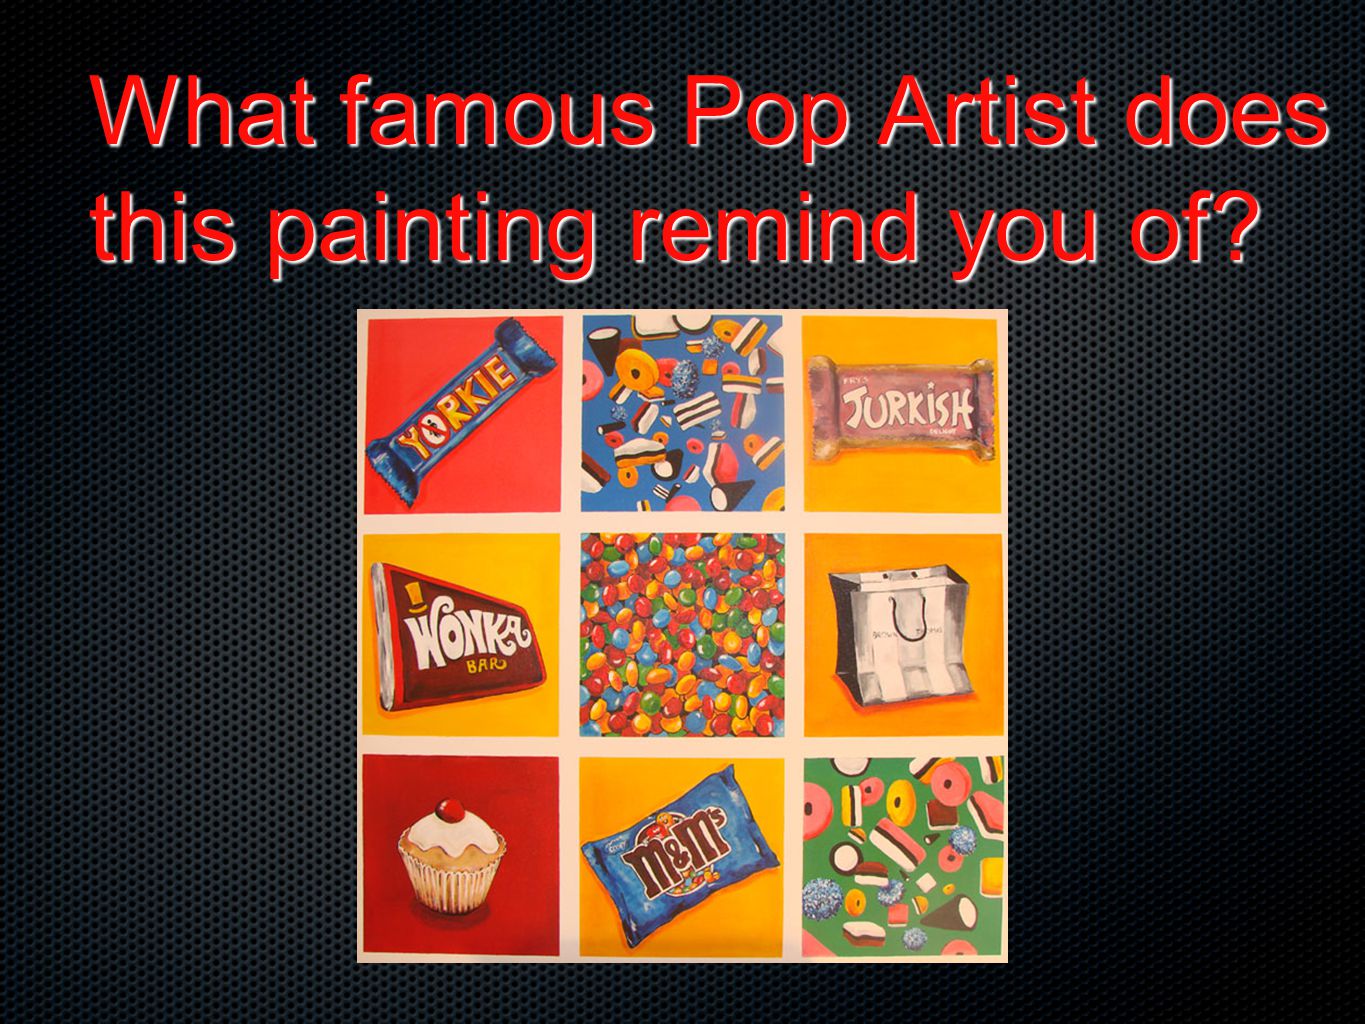 What famous Pop Artist does this painting remind you of